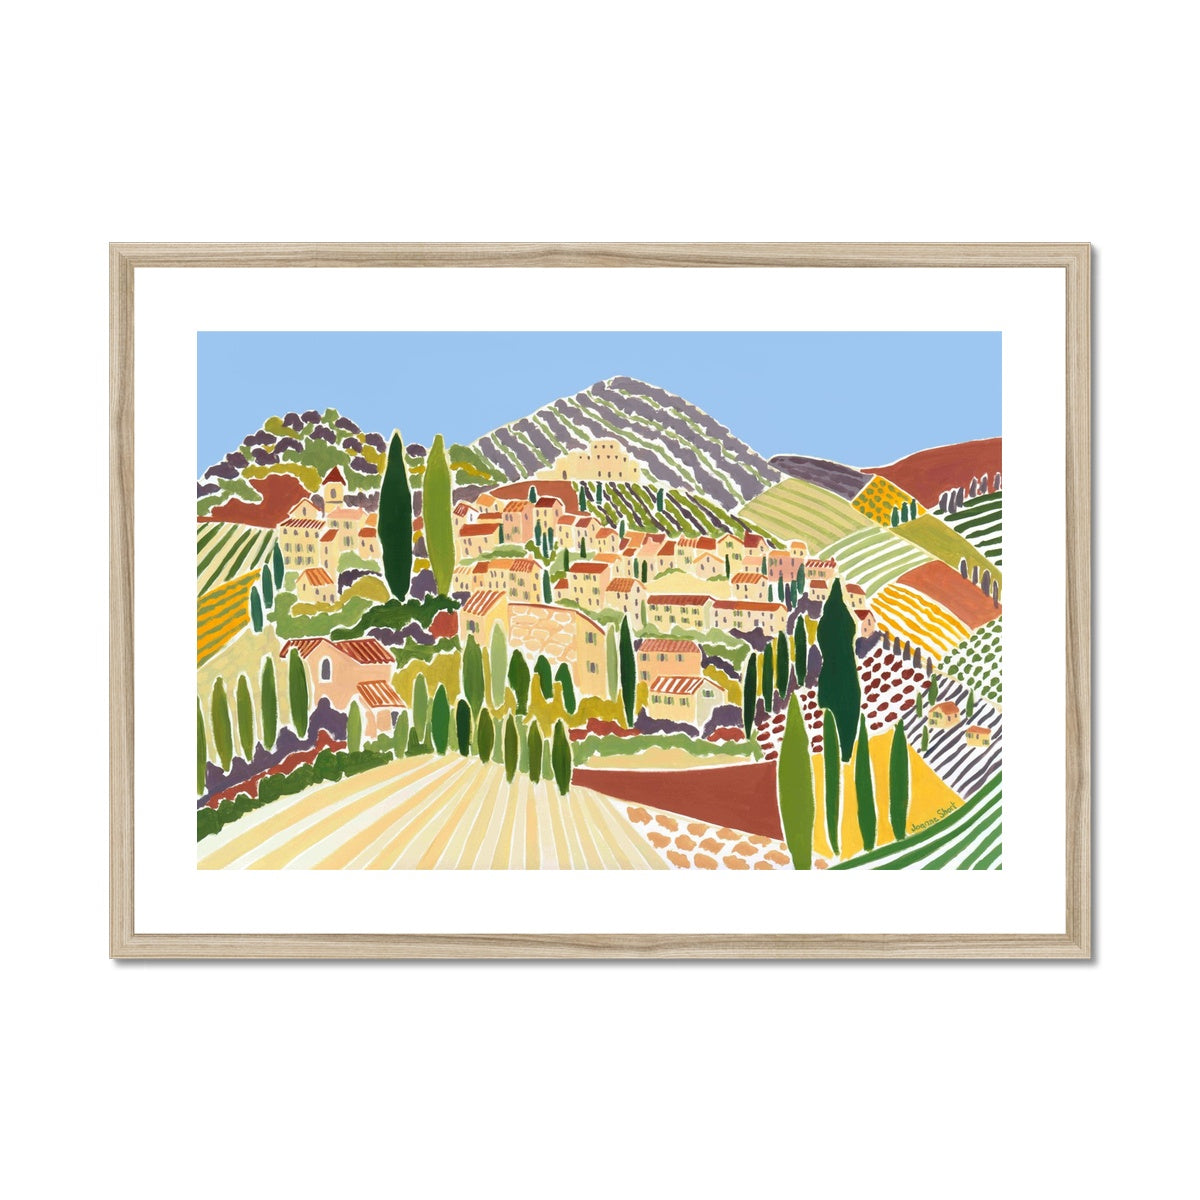 Joanne Short Framed Open Edition French Art Print. &#39;The Old Town, Vaison La Romaine, Provence&#39;. French Art Gallery